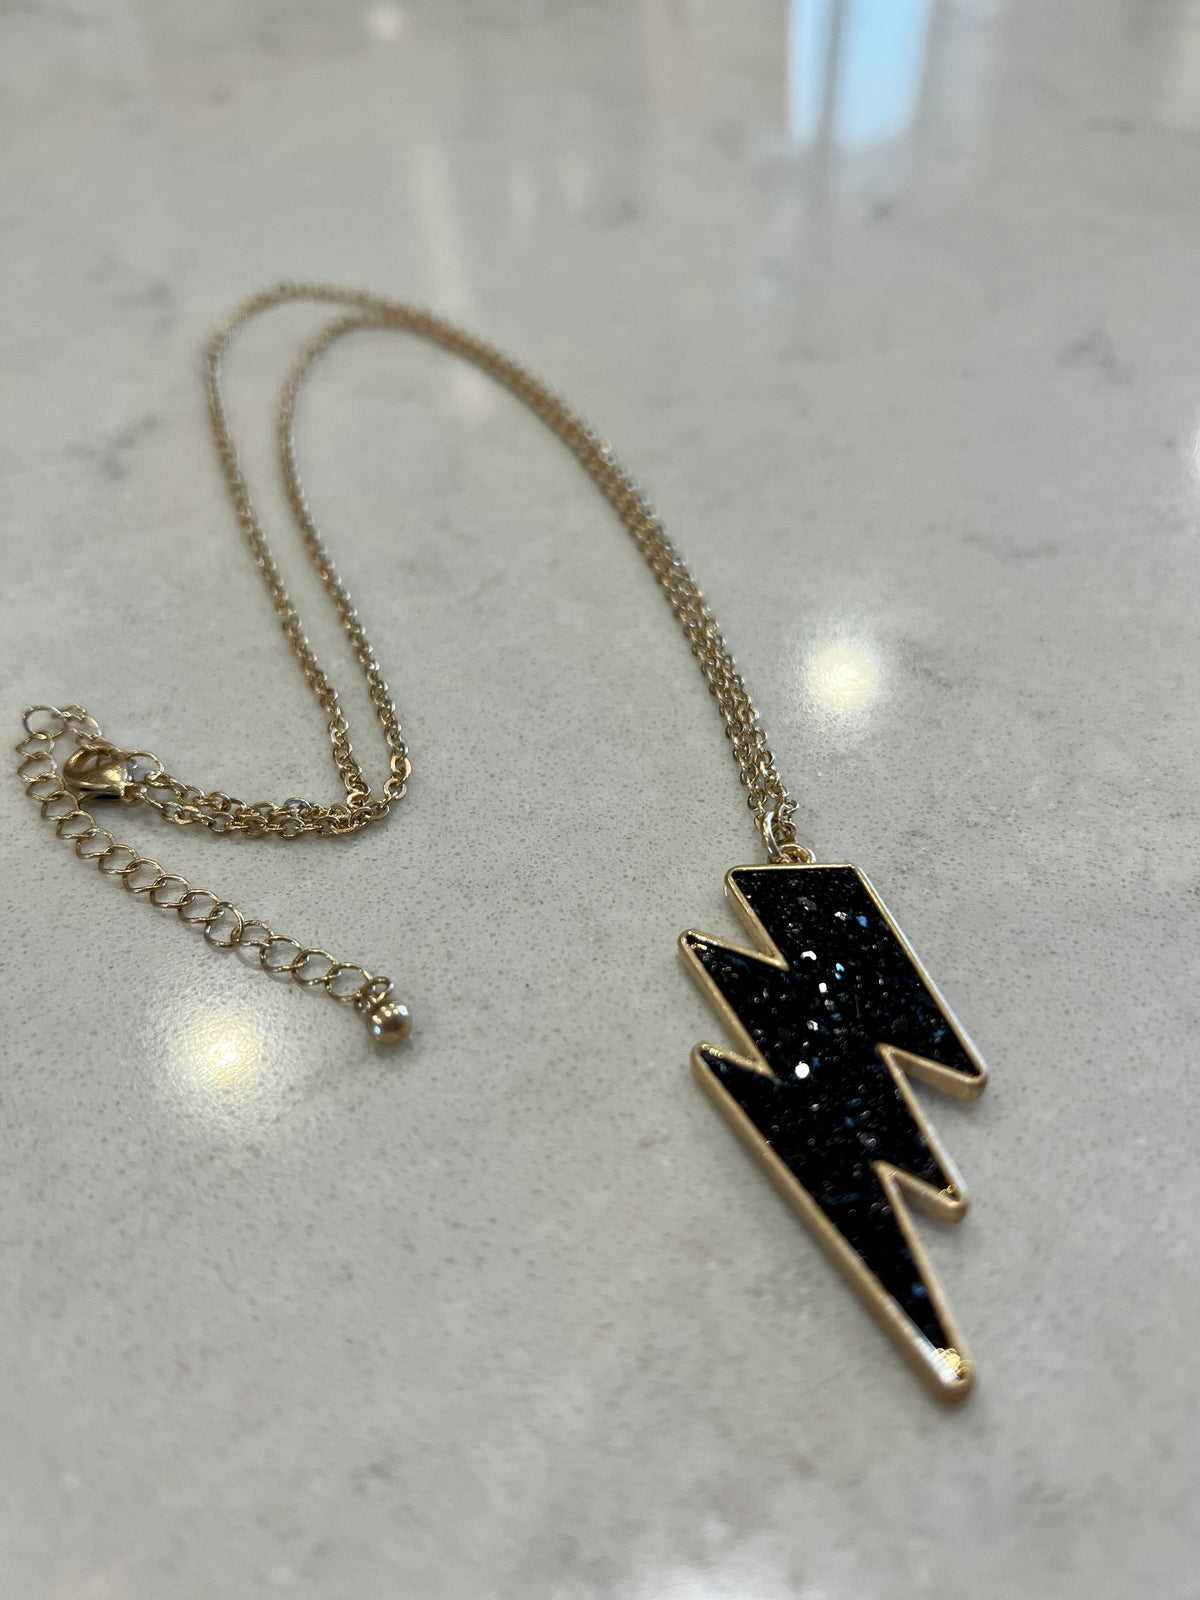 The Thunder Necklace